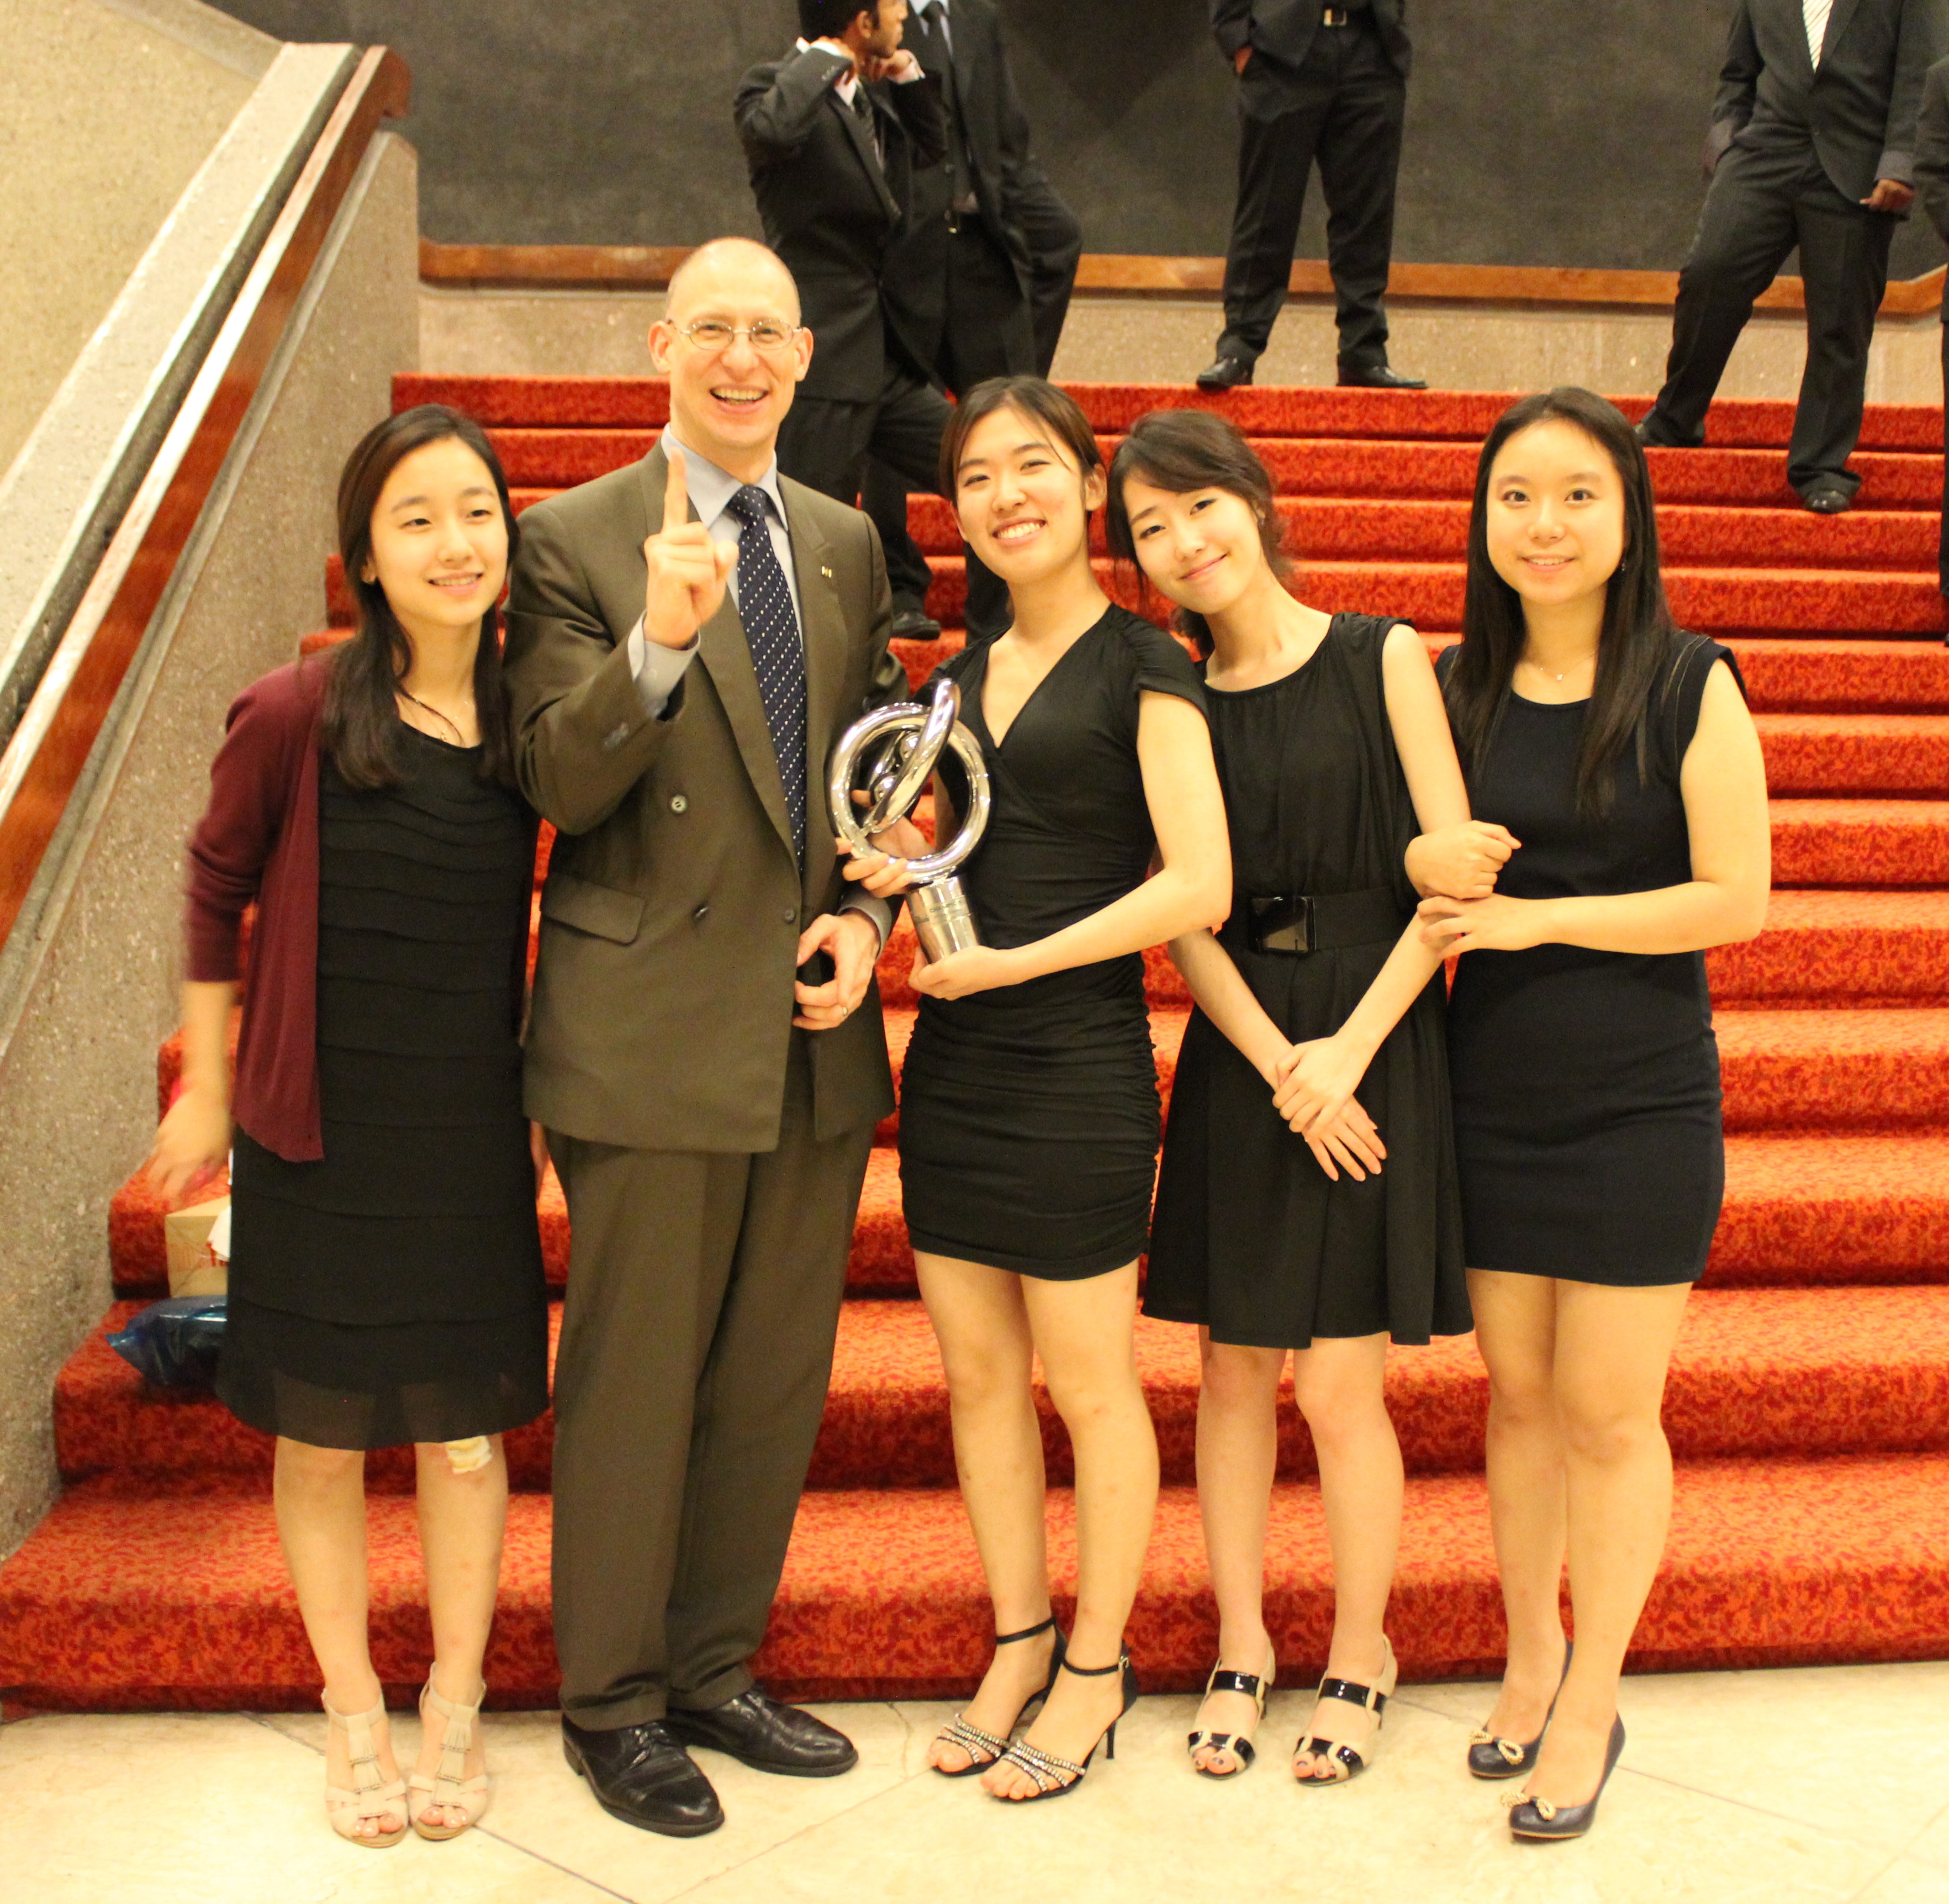 Peter Kipp poses with members of the Debate Association of Ewha at Manila Worlds 2010/2011.